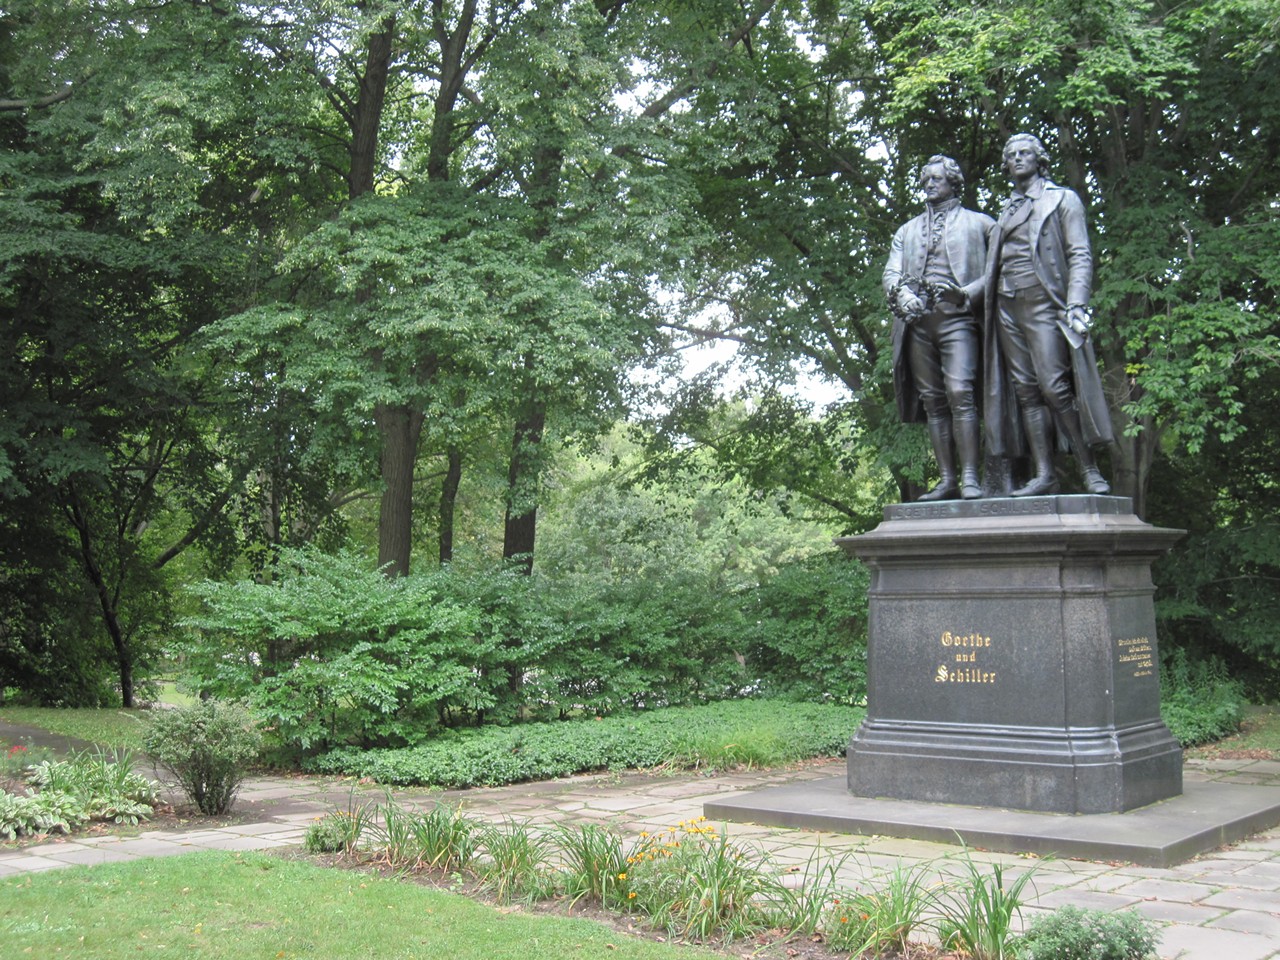 Goethe und Schiller stand above the German Cultural Garden. Scale-wise, this statue is very tall.